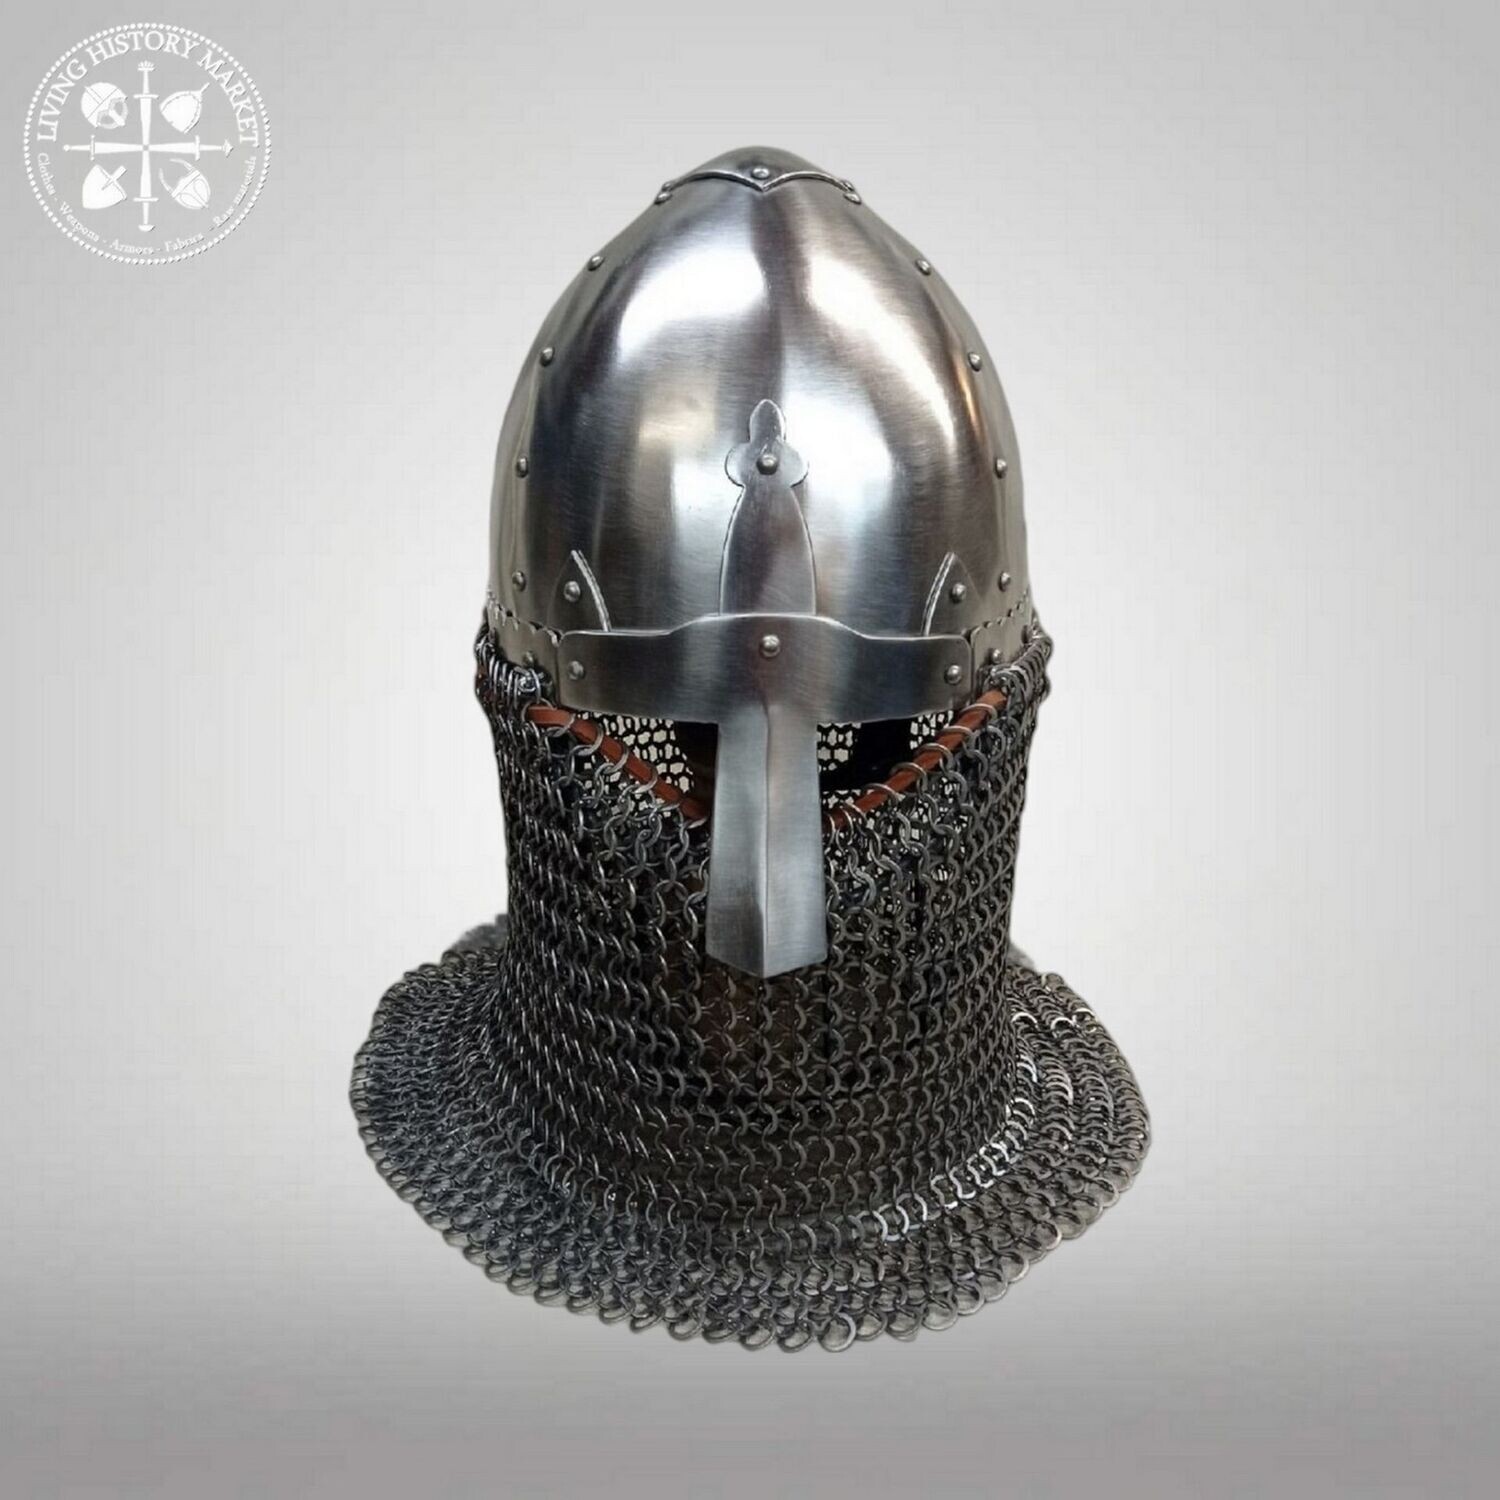 Manvelovka helmet - Special full contact version - 10-11th centuries ( full chainmail aventail & hidden face grid included)